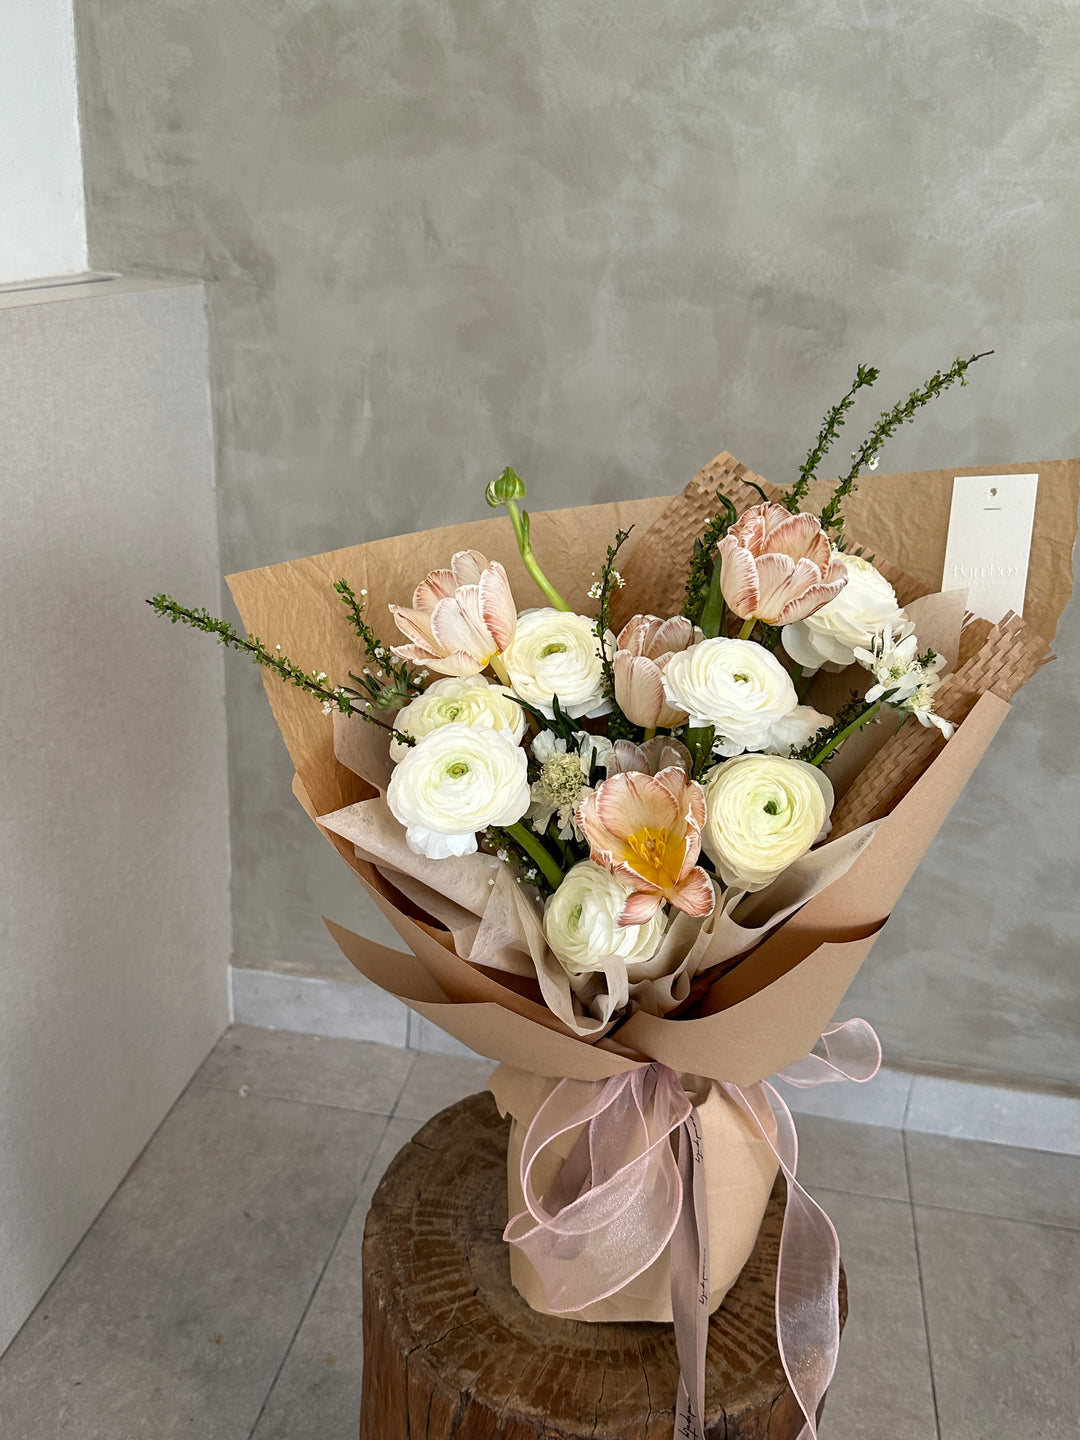 Leave it to us to create an original design with current in season flowers - ranunculus. The ranunculus blooms in the early spring and will continue to do so until the beginning of summer 